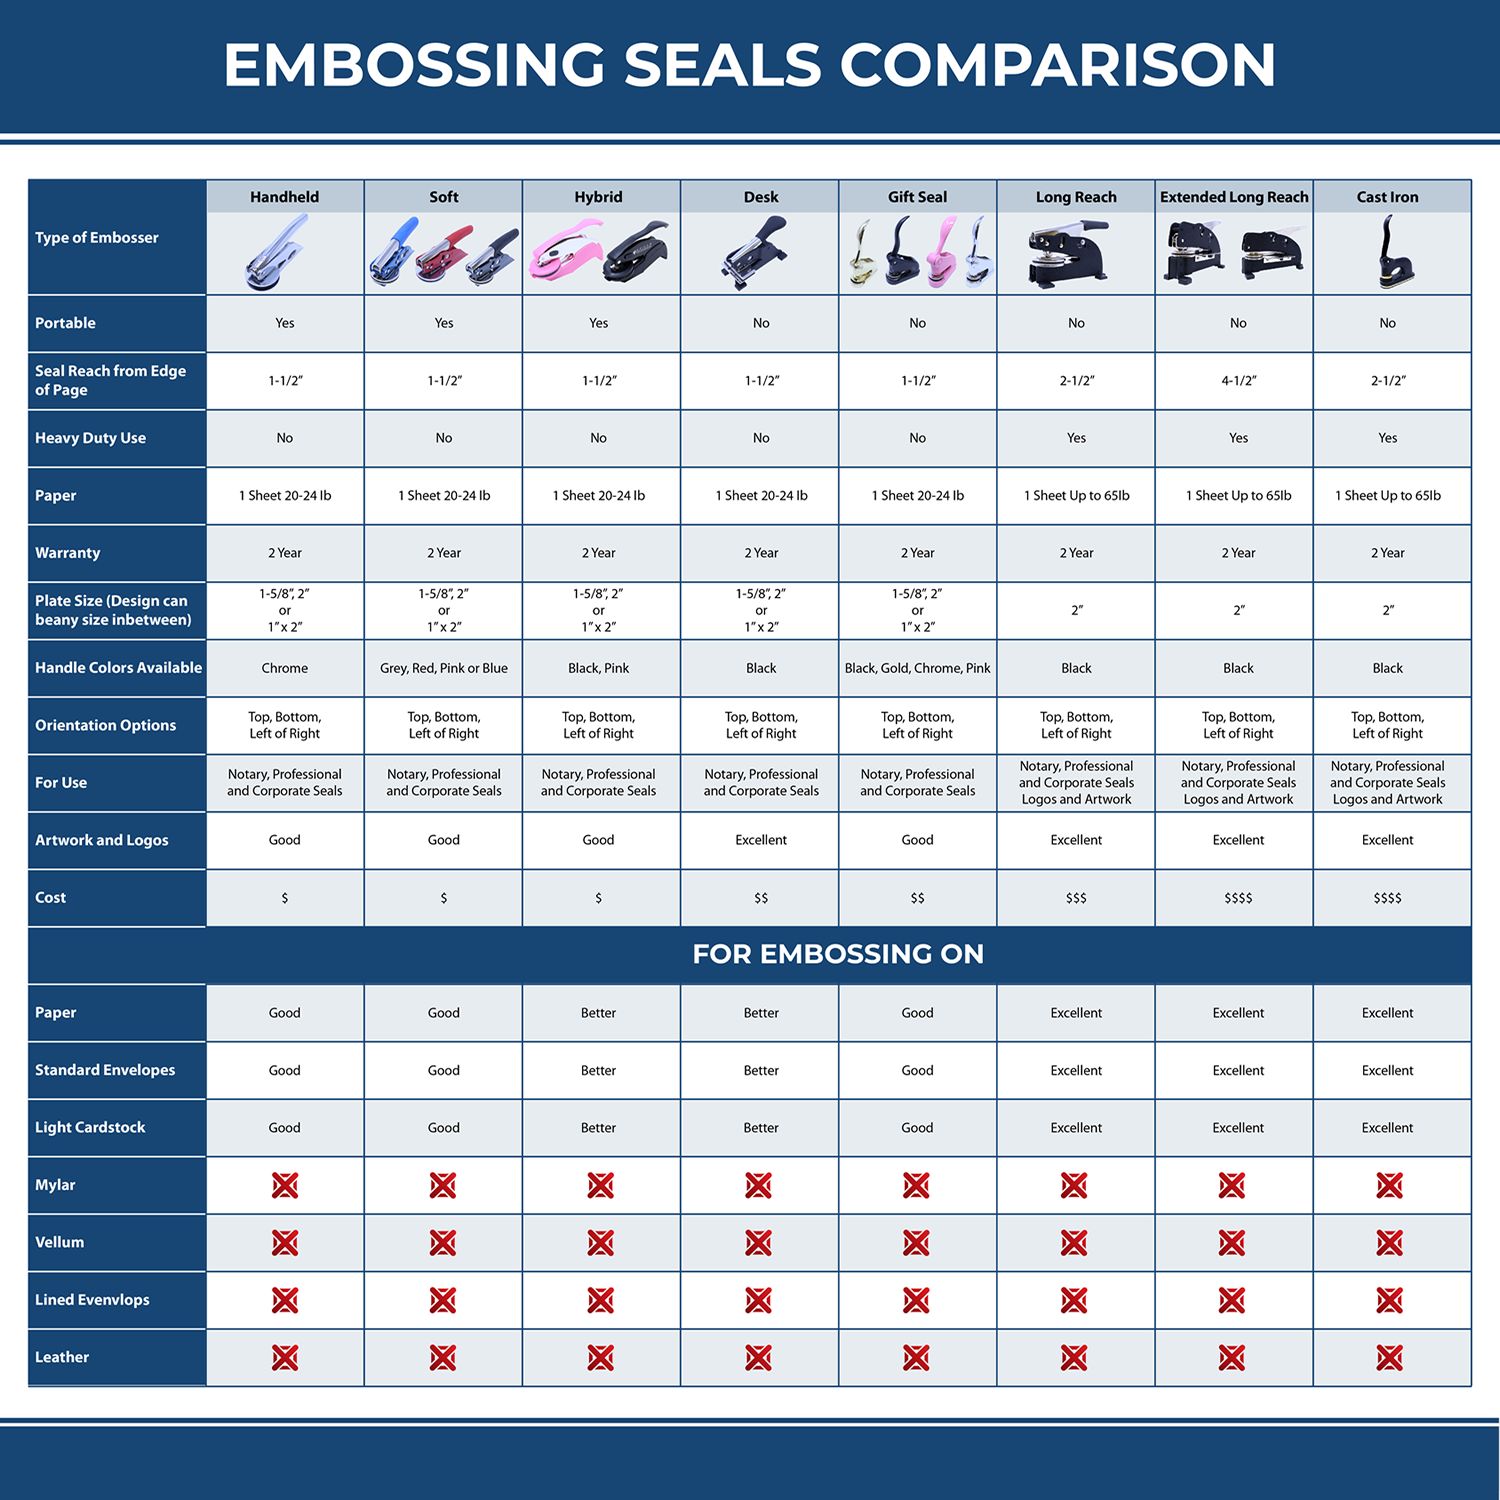 A comparison chart for the different types of mount models available for the Extended Long Reach Tennessee Surveyor Embosser.